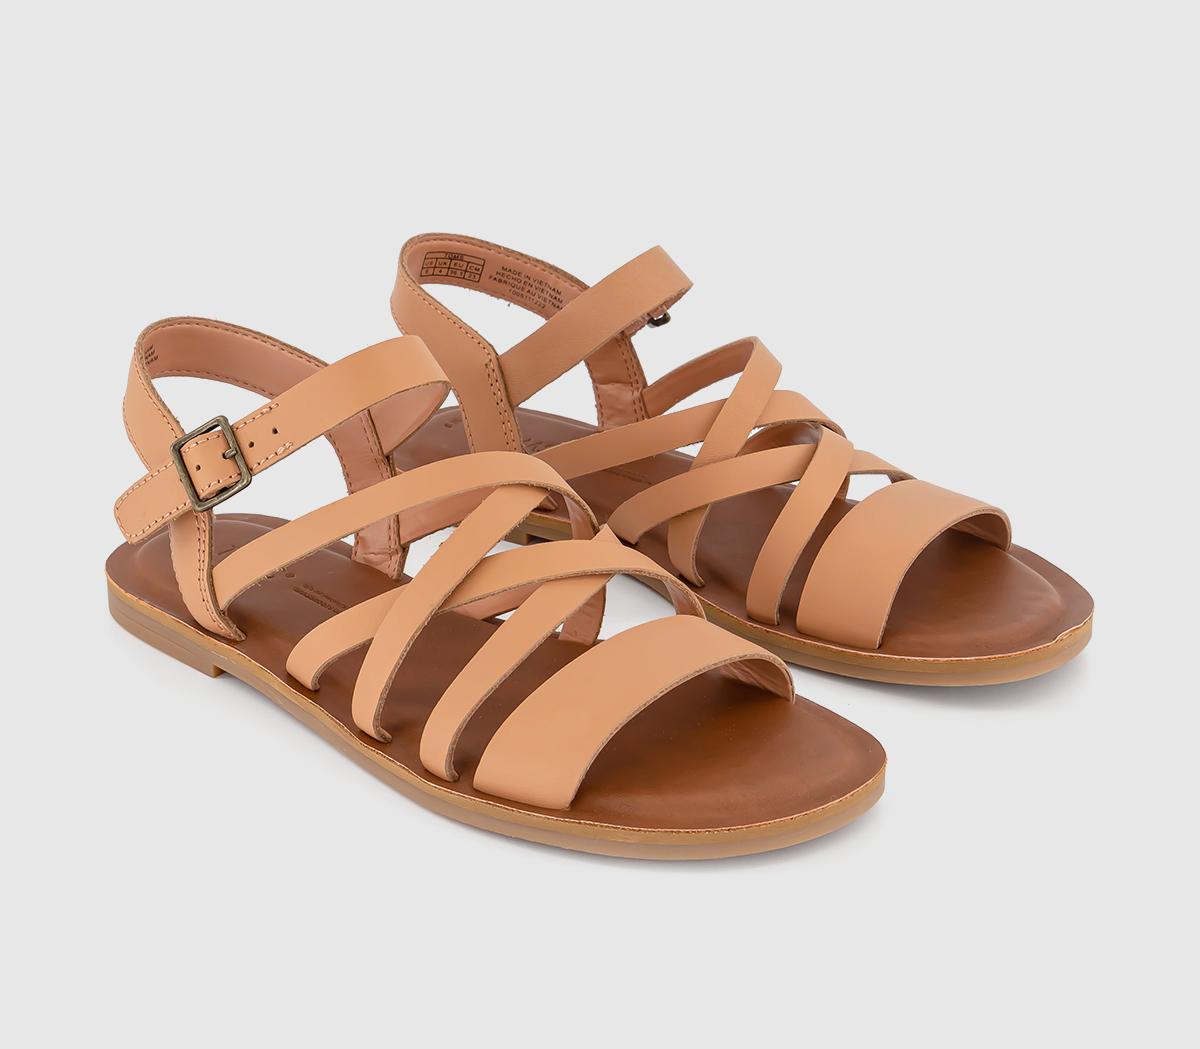 TOMS Womens Sephina Sandals Sandy Beige Leather Natural, 4